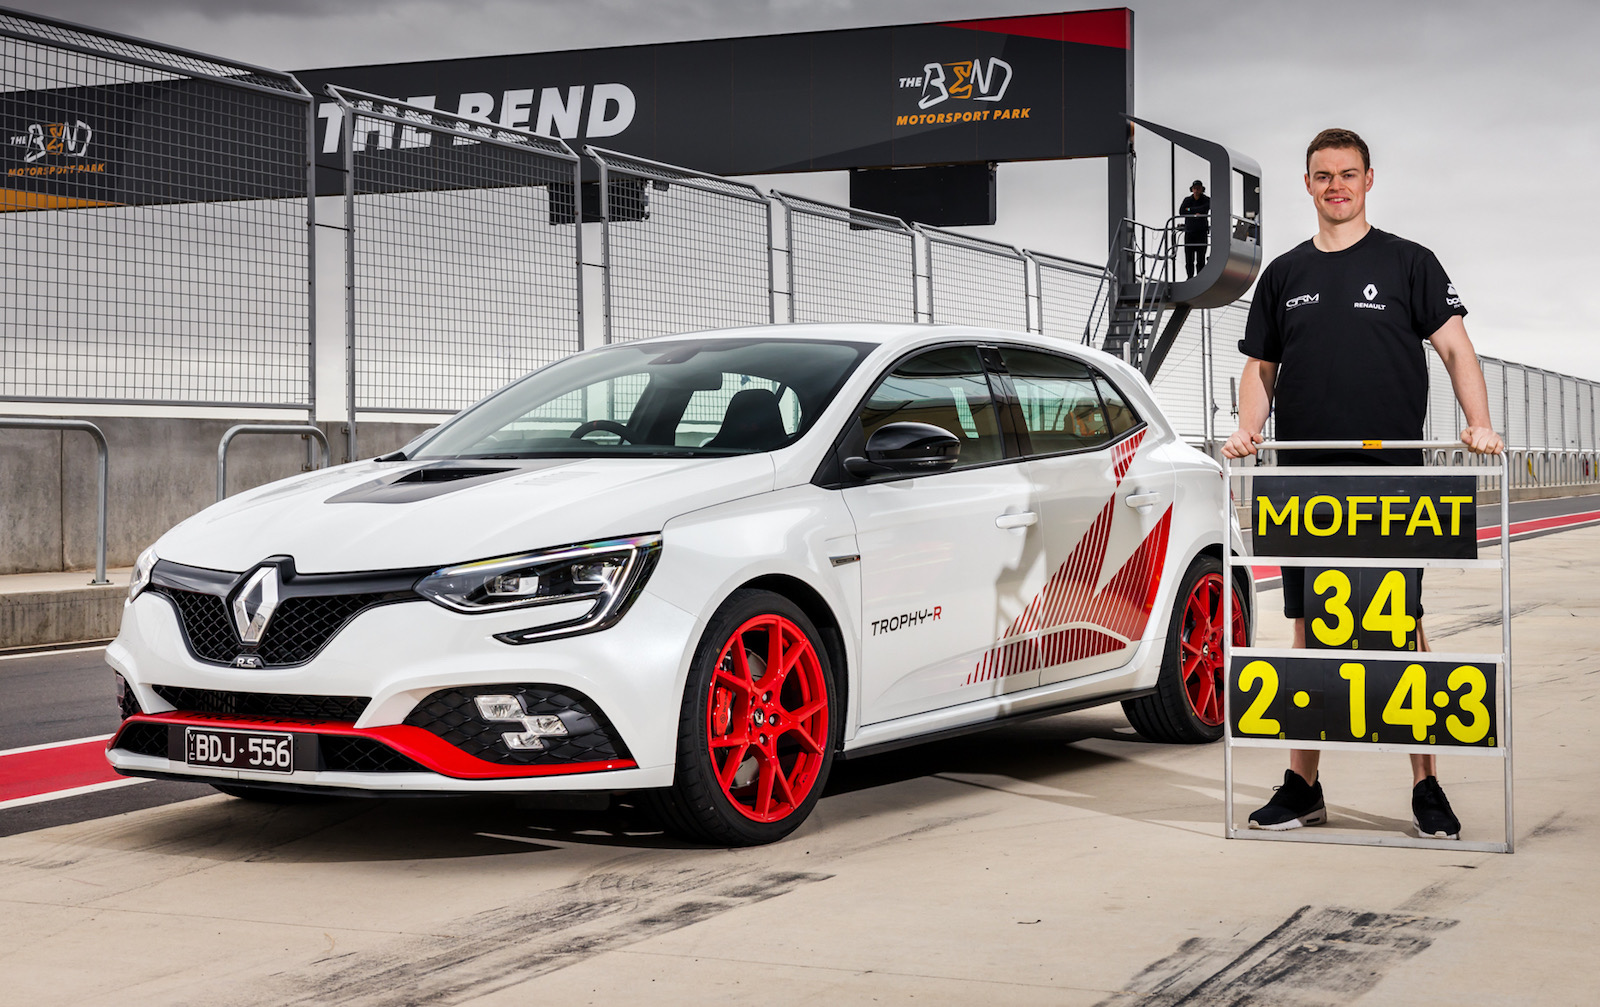 Renault Megane RS Trophy-R sets lap record at The Bend (video)